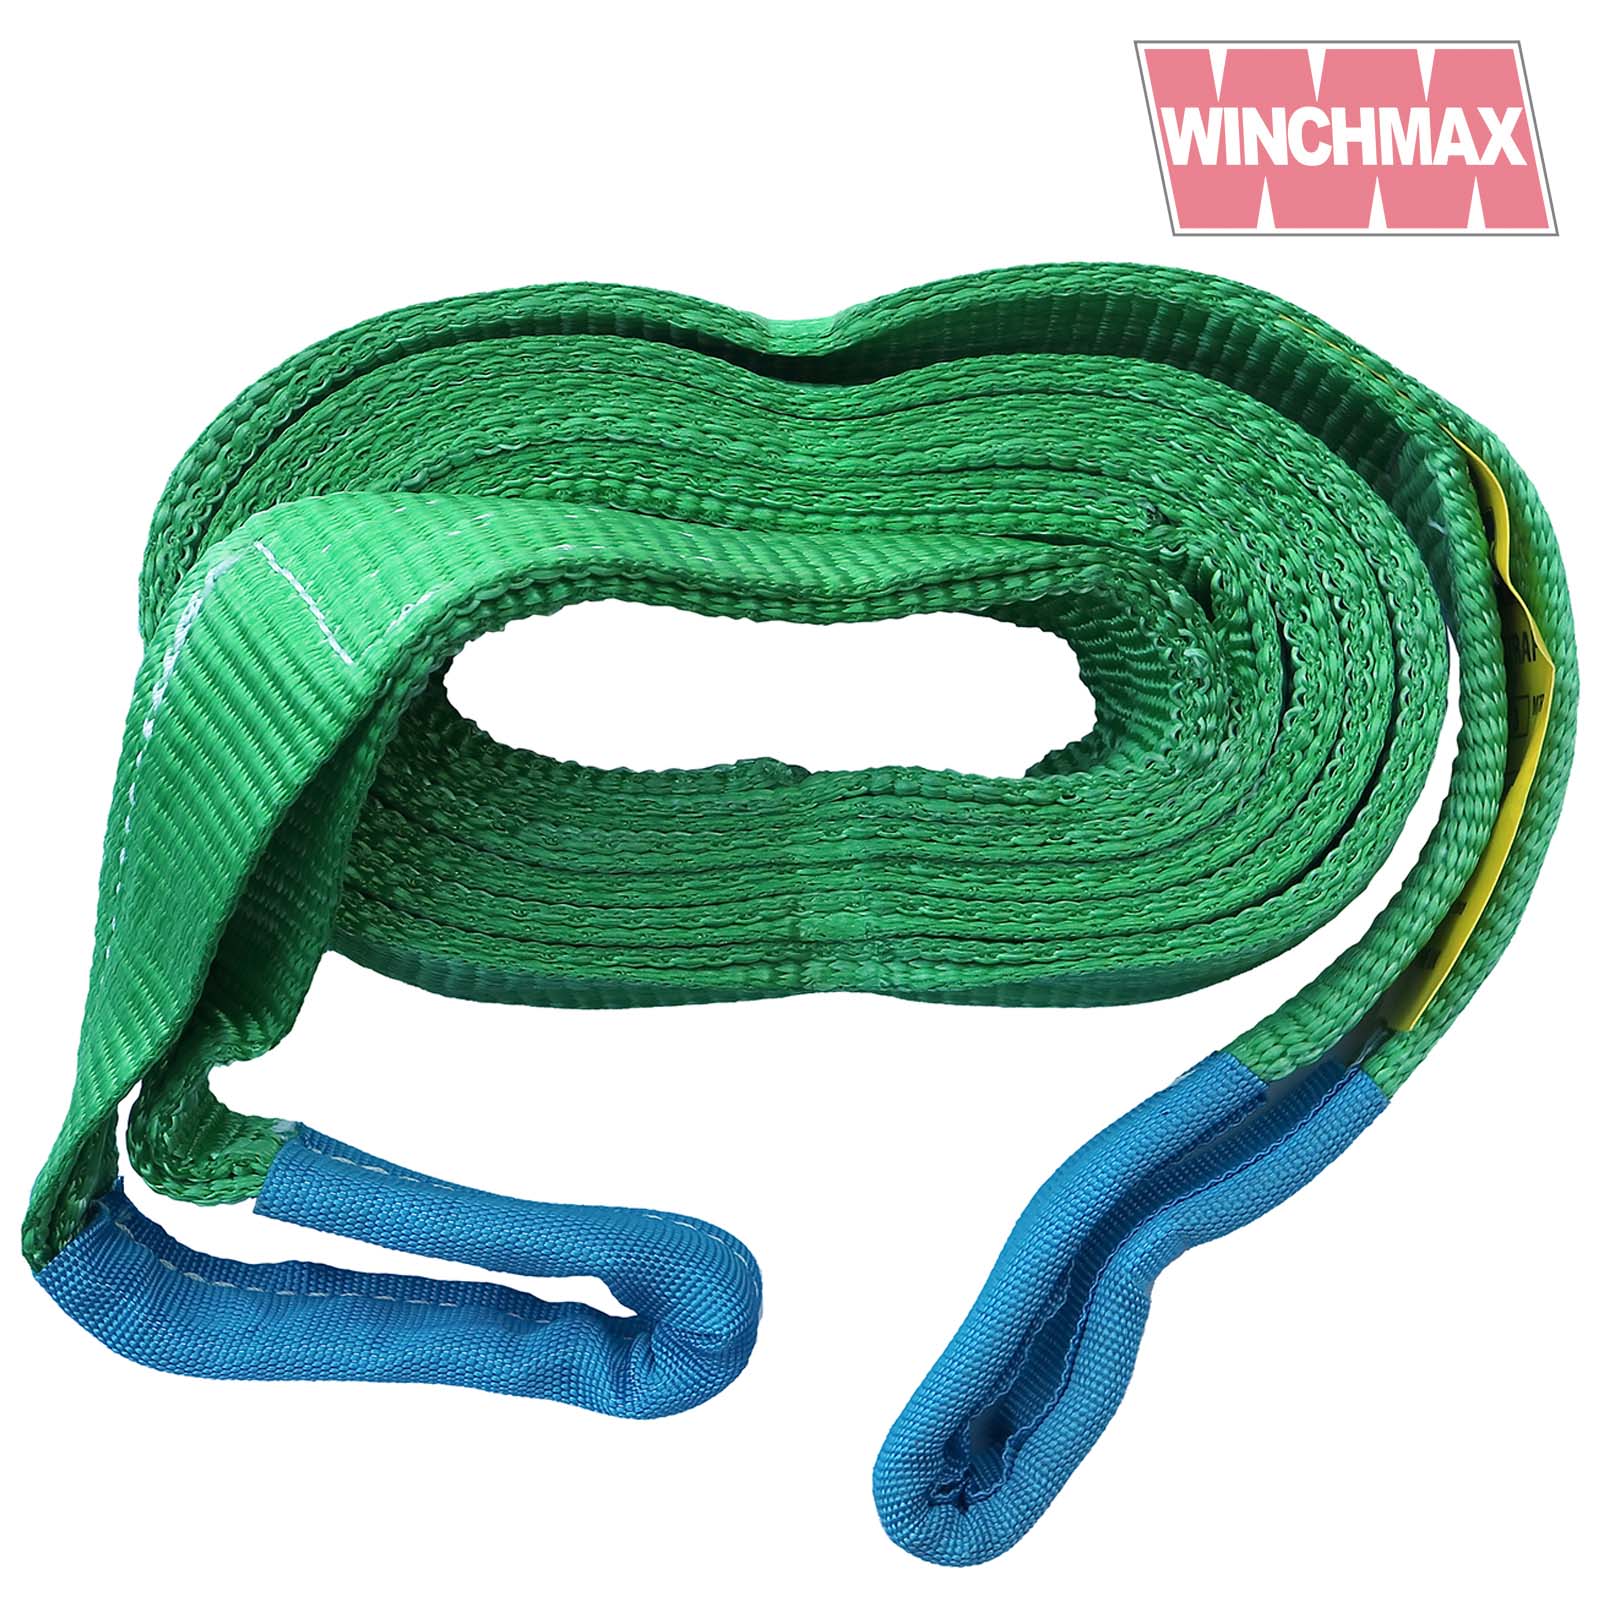 WINCHMAX 3m Recovery Strop